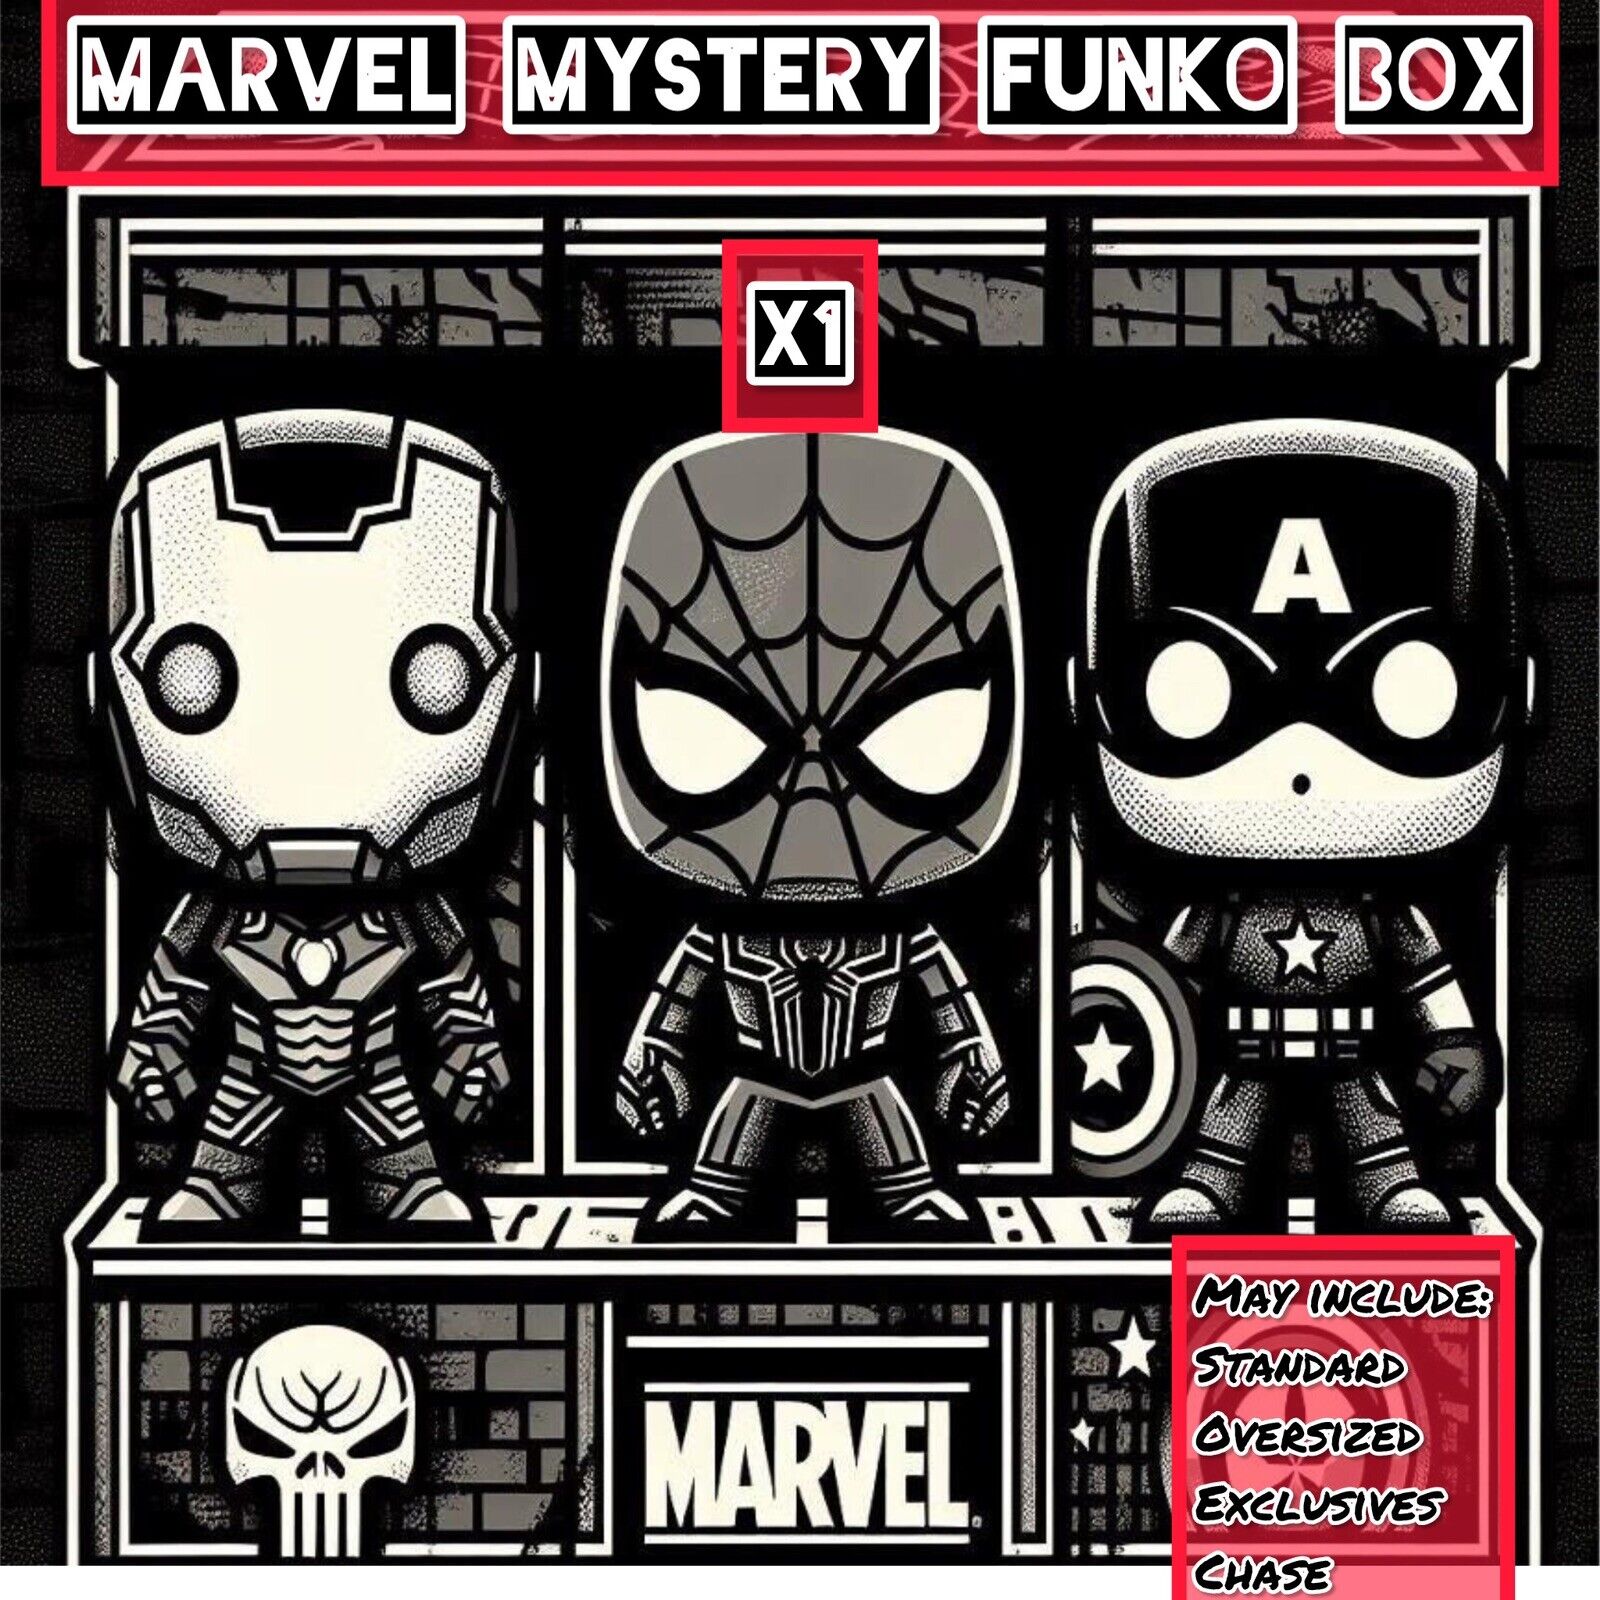 Funko Mystery Box Marvel Chance Of Oversized,standard, Exclusives, And Chase